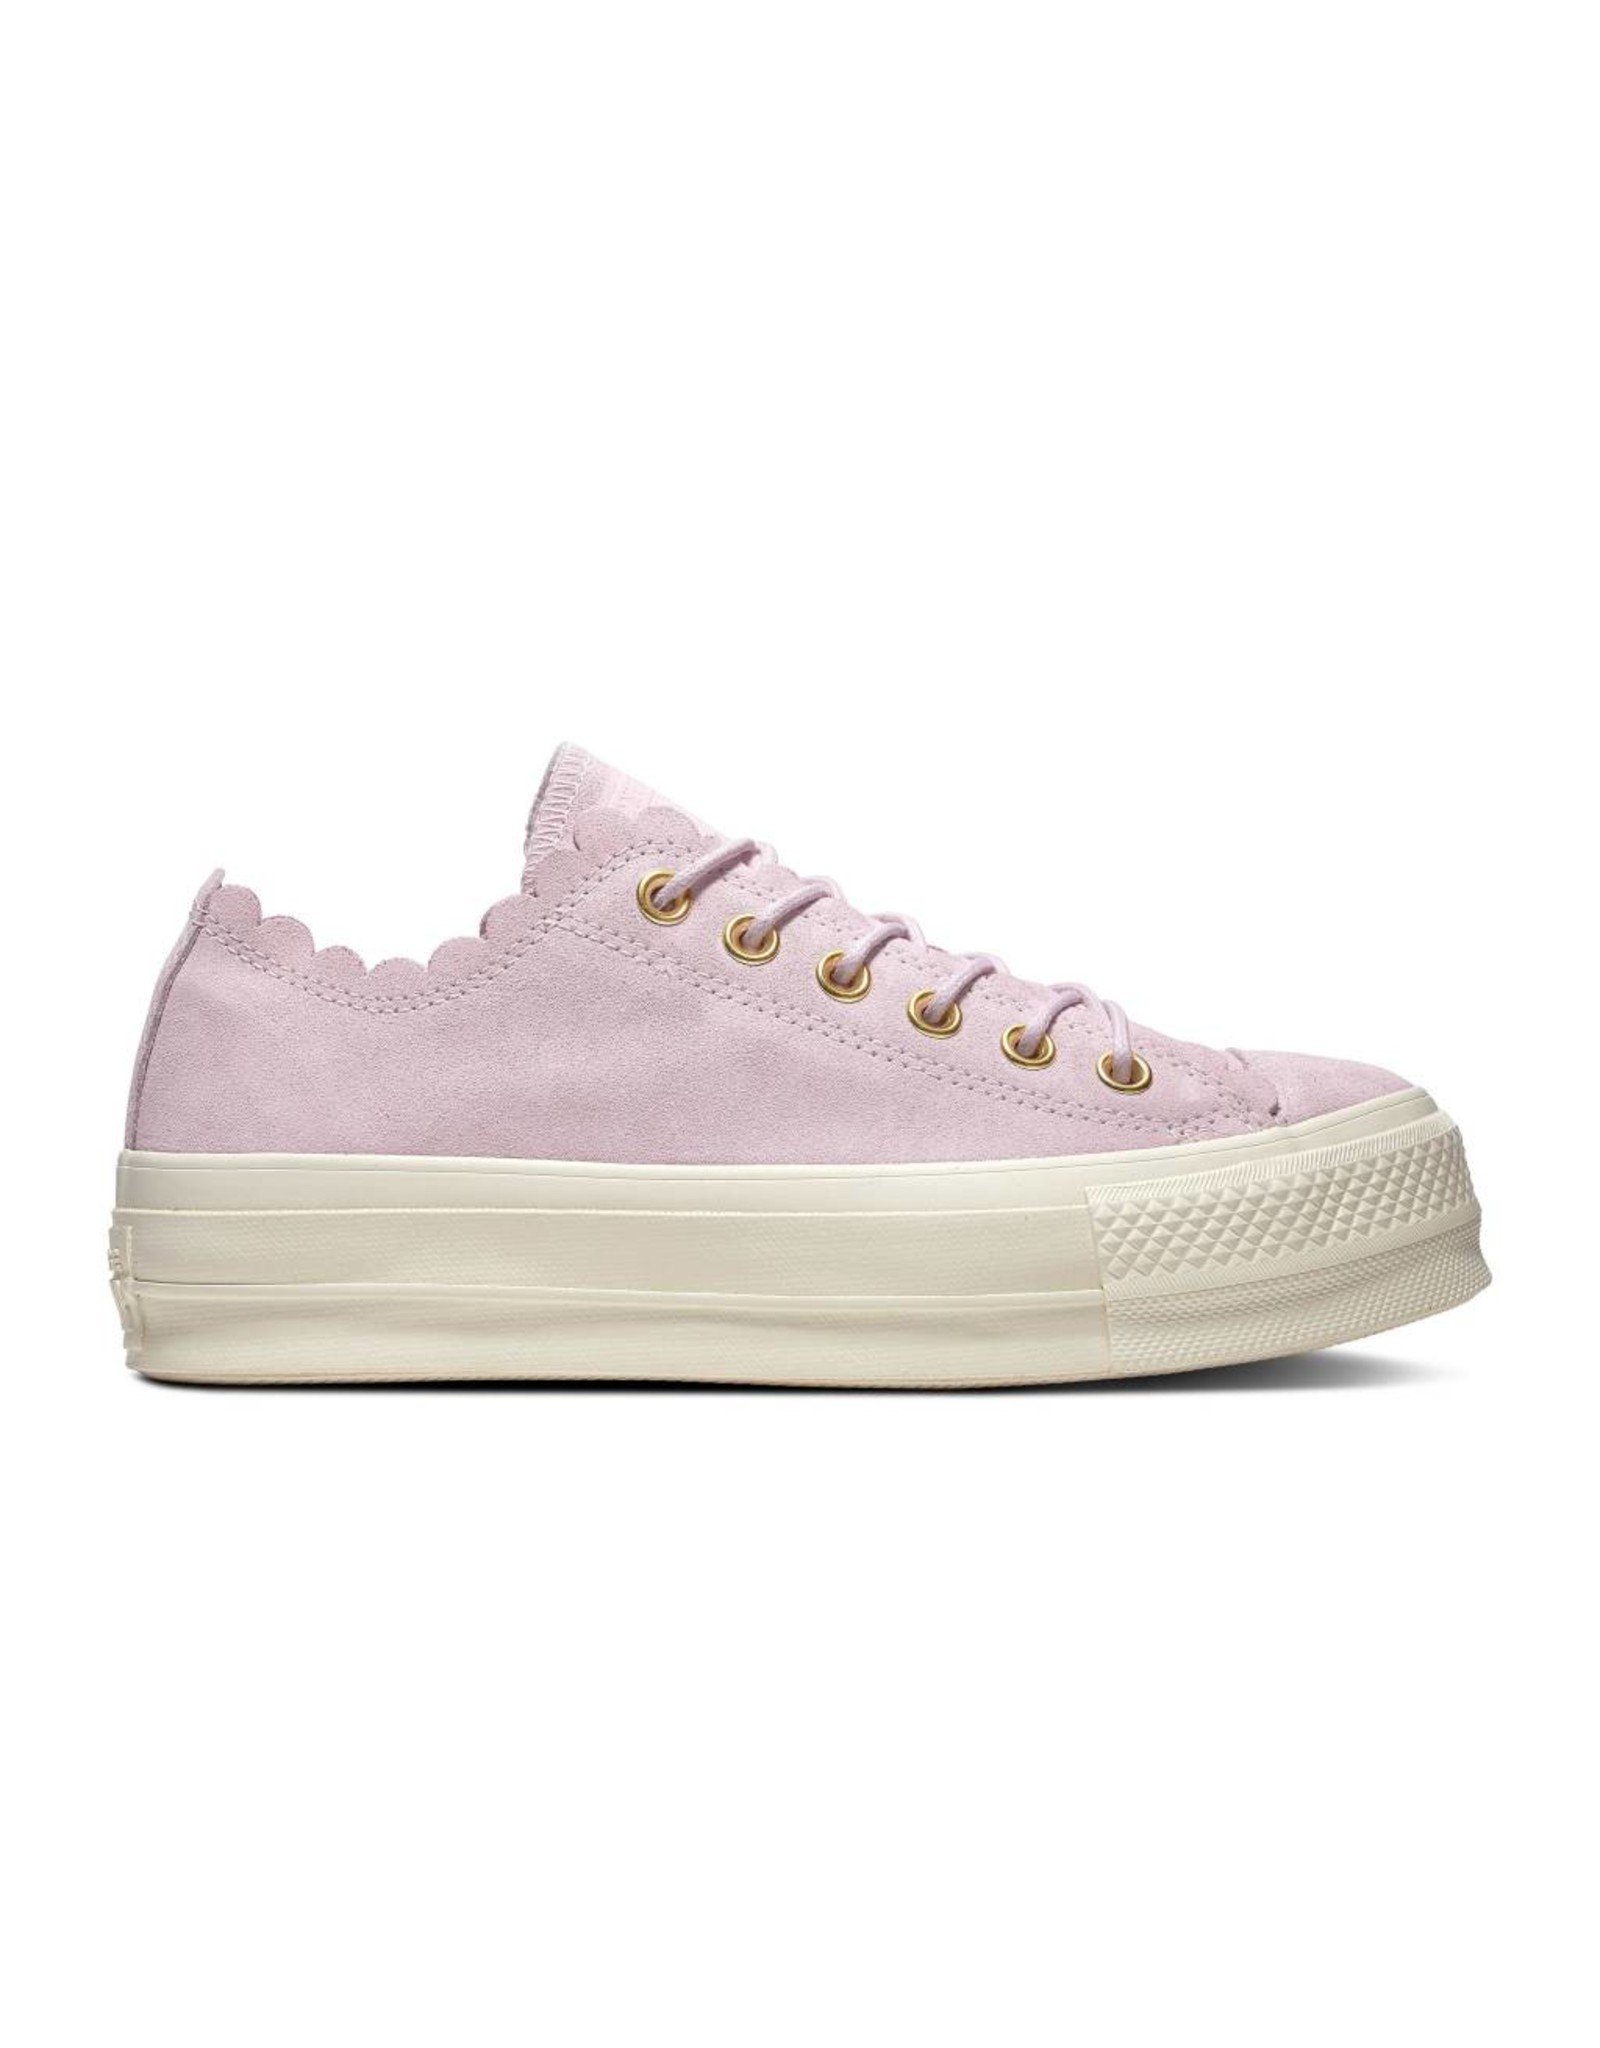 CONVERSE CHUCK TAYLOR ALL STAR LIFT OX SUEDE PINK FOAM/GOLD/EGRET C13PPF-563500C